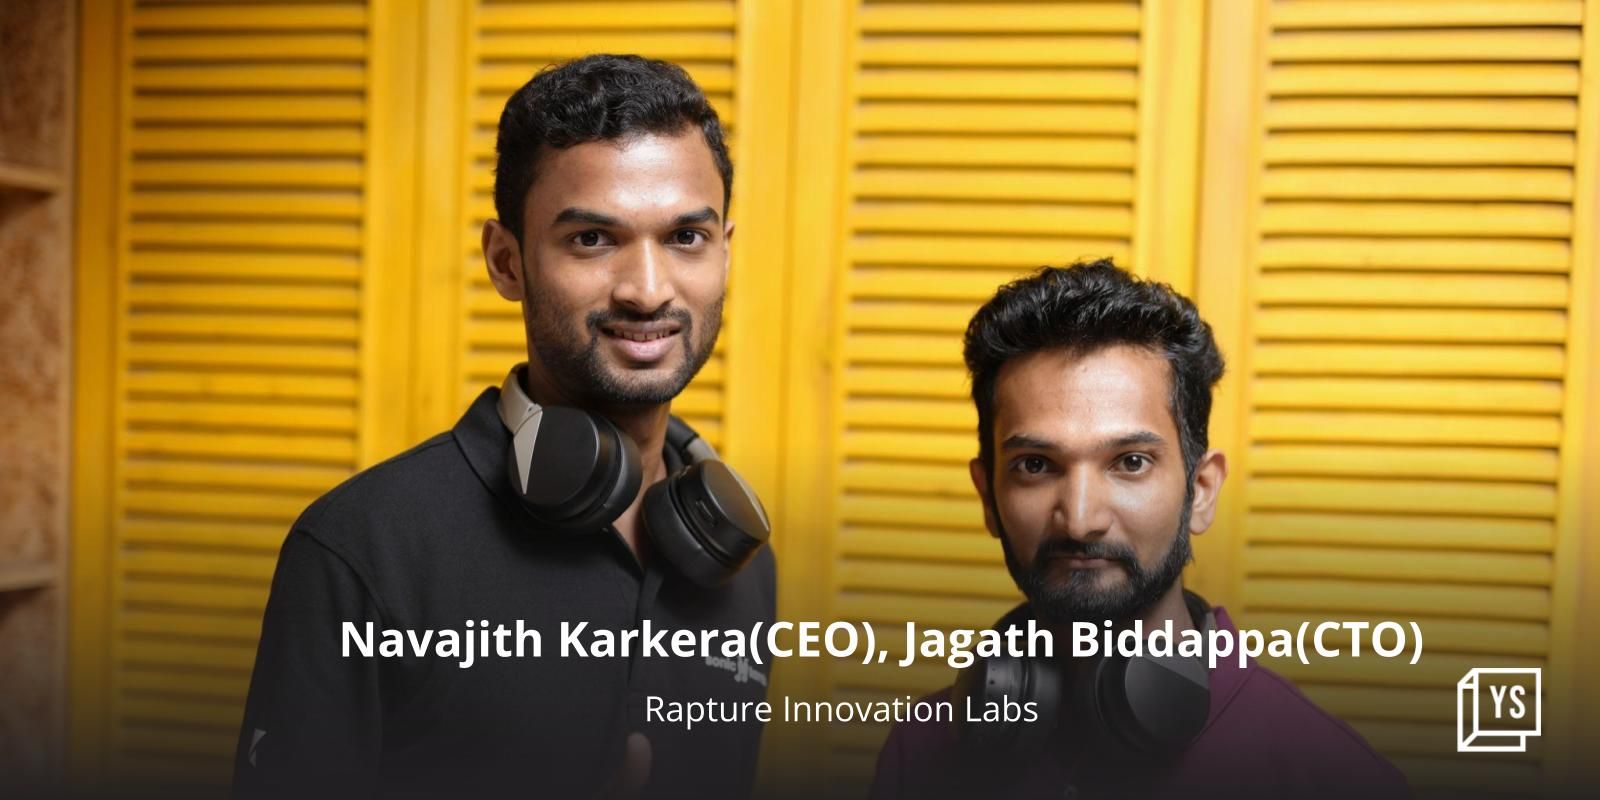 With audio innovation, Hubballi-based Rapture Innovation Labs looks to disrupt wearables space